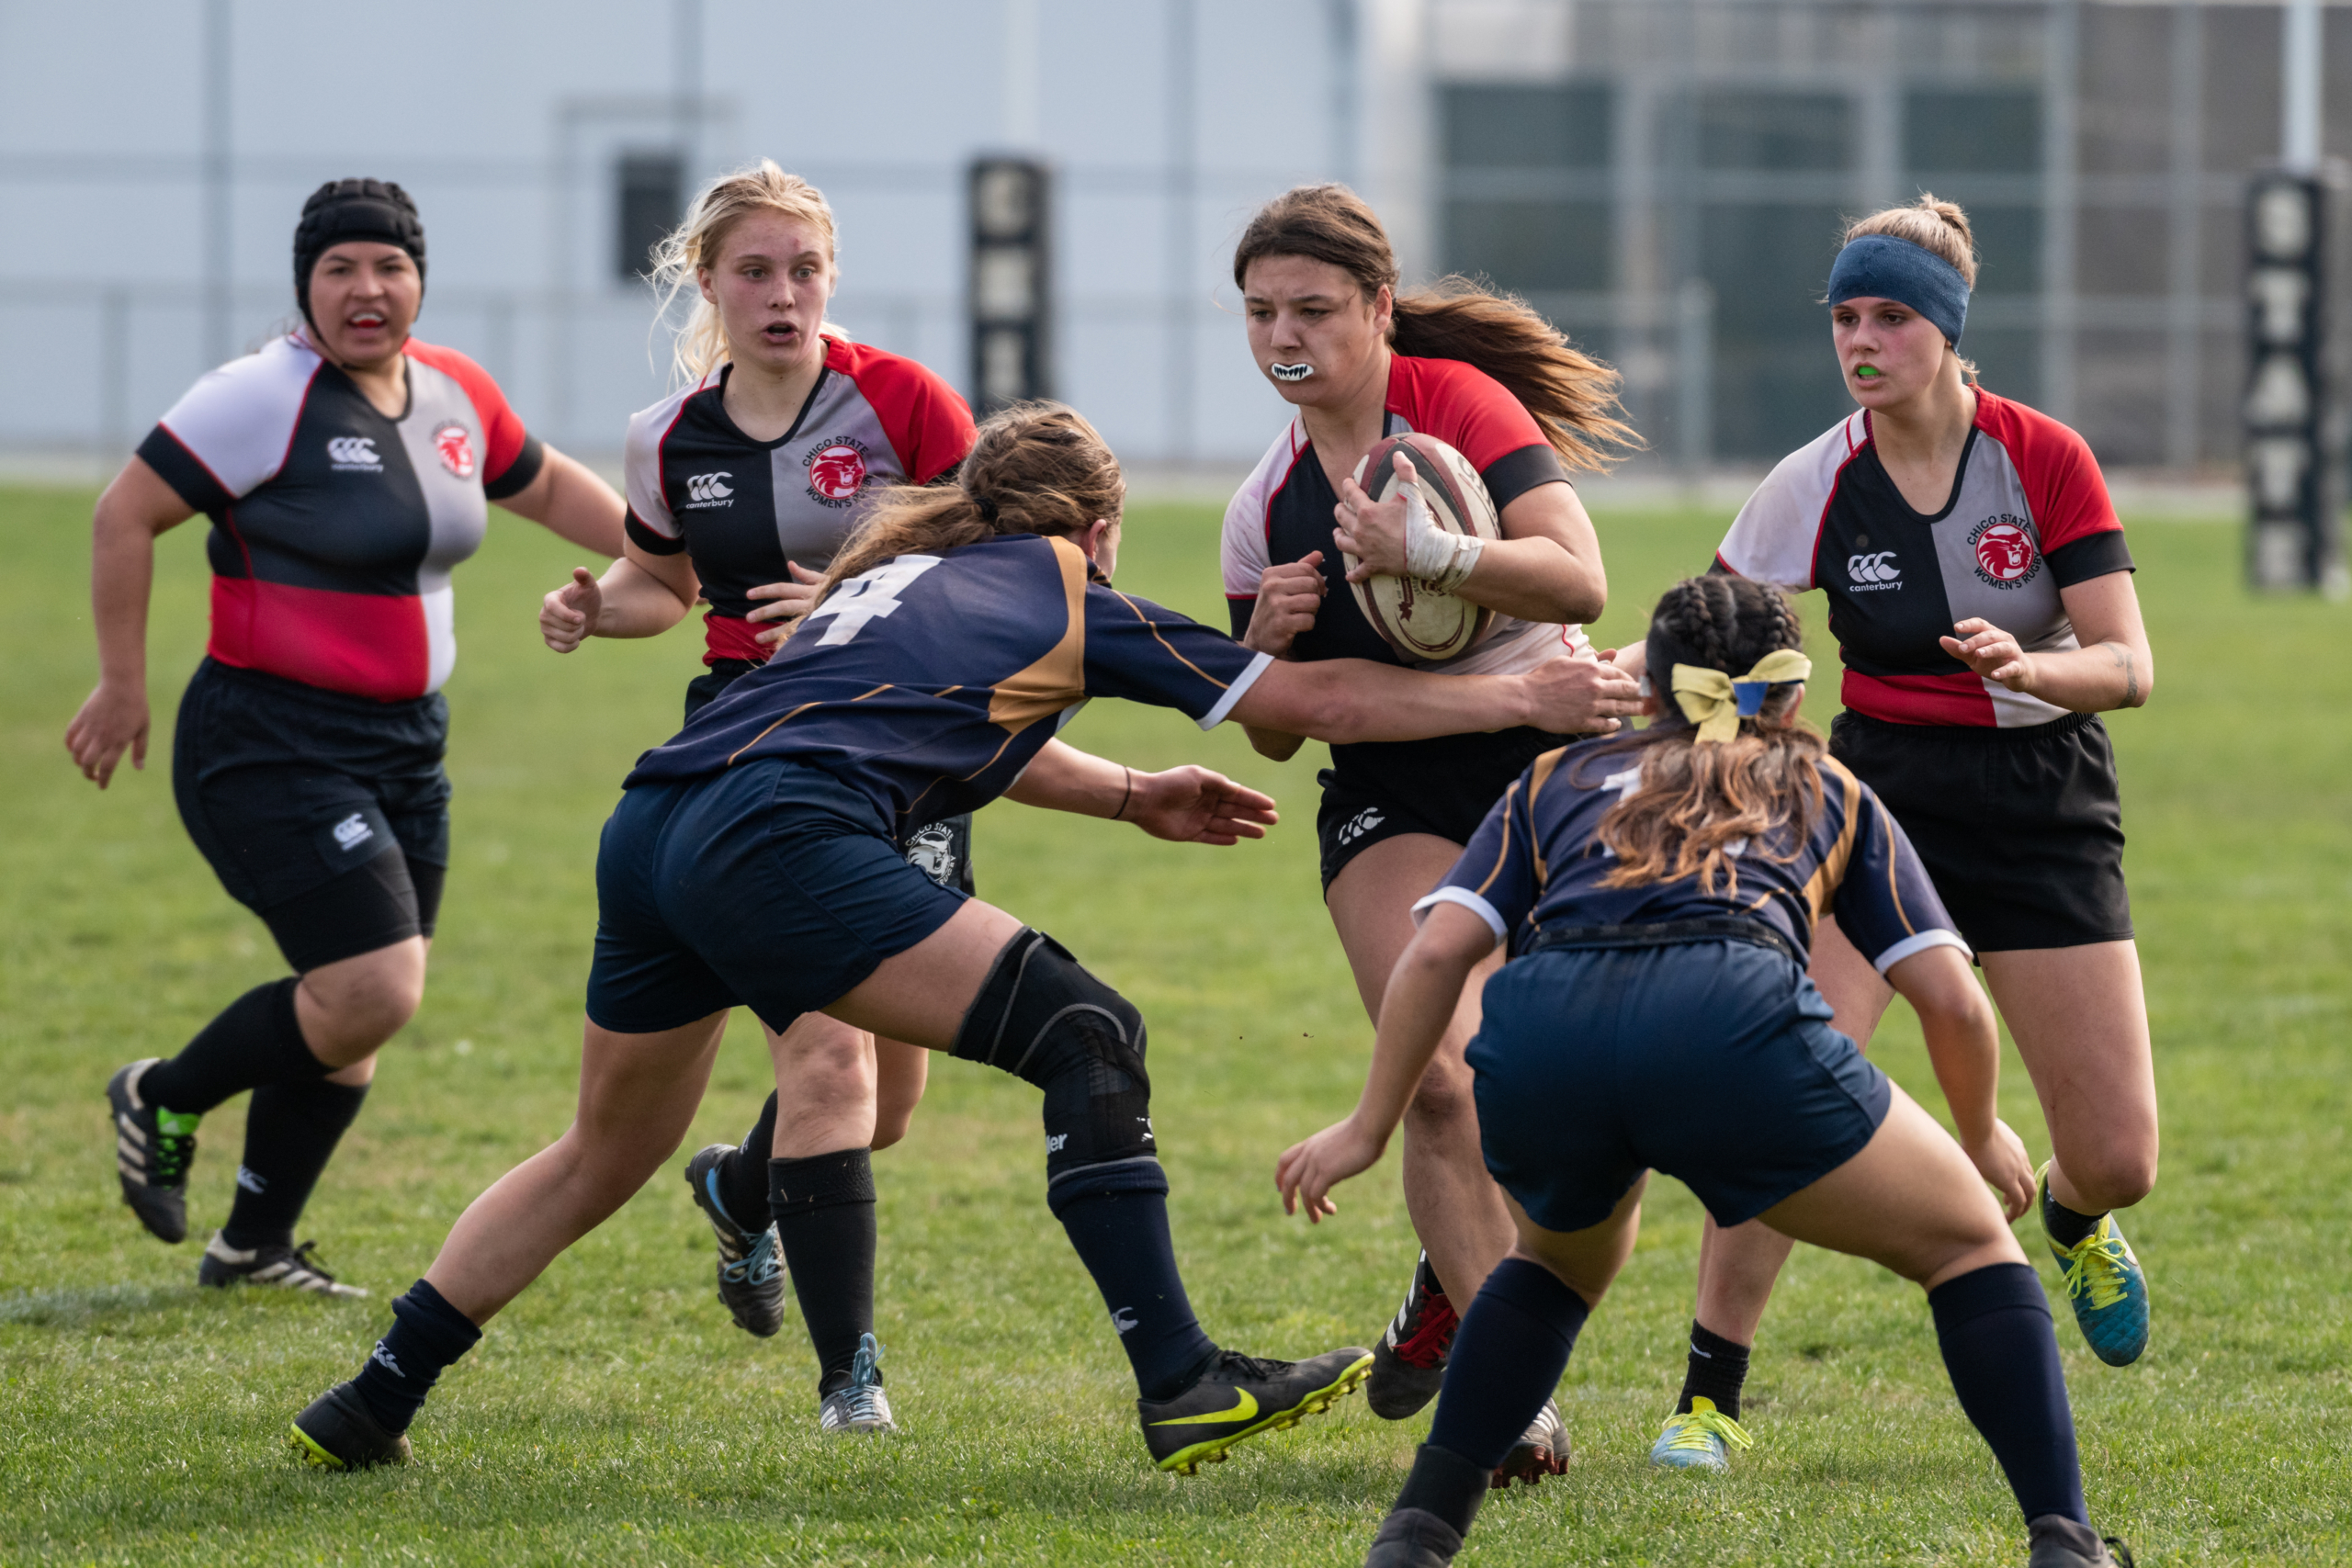 A Chico State Rugby player carries the ball while opposing players attempt to tackle her.